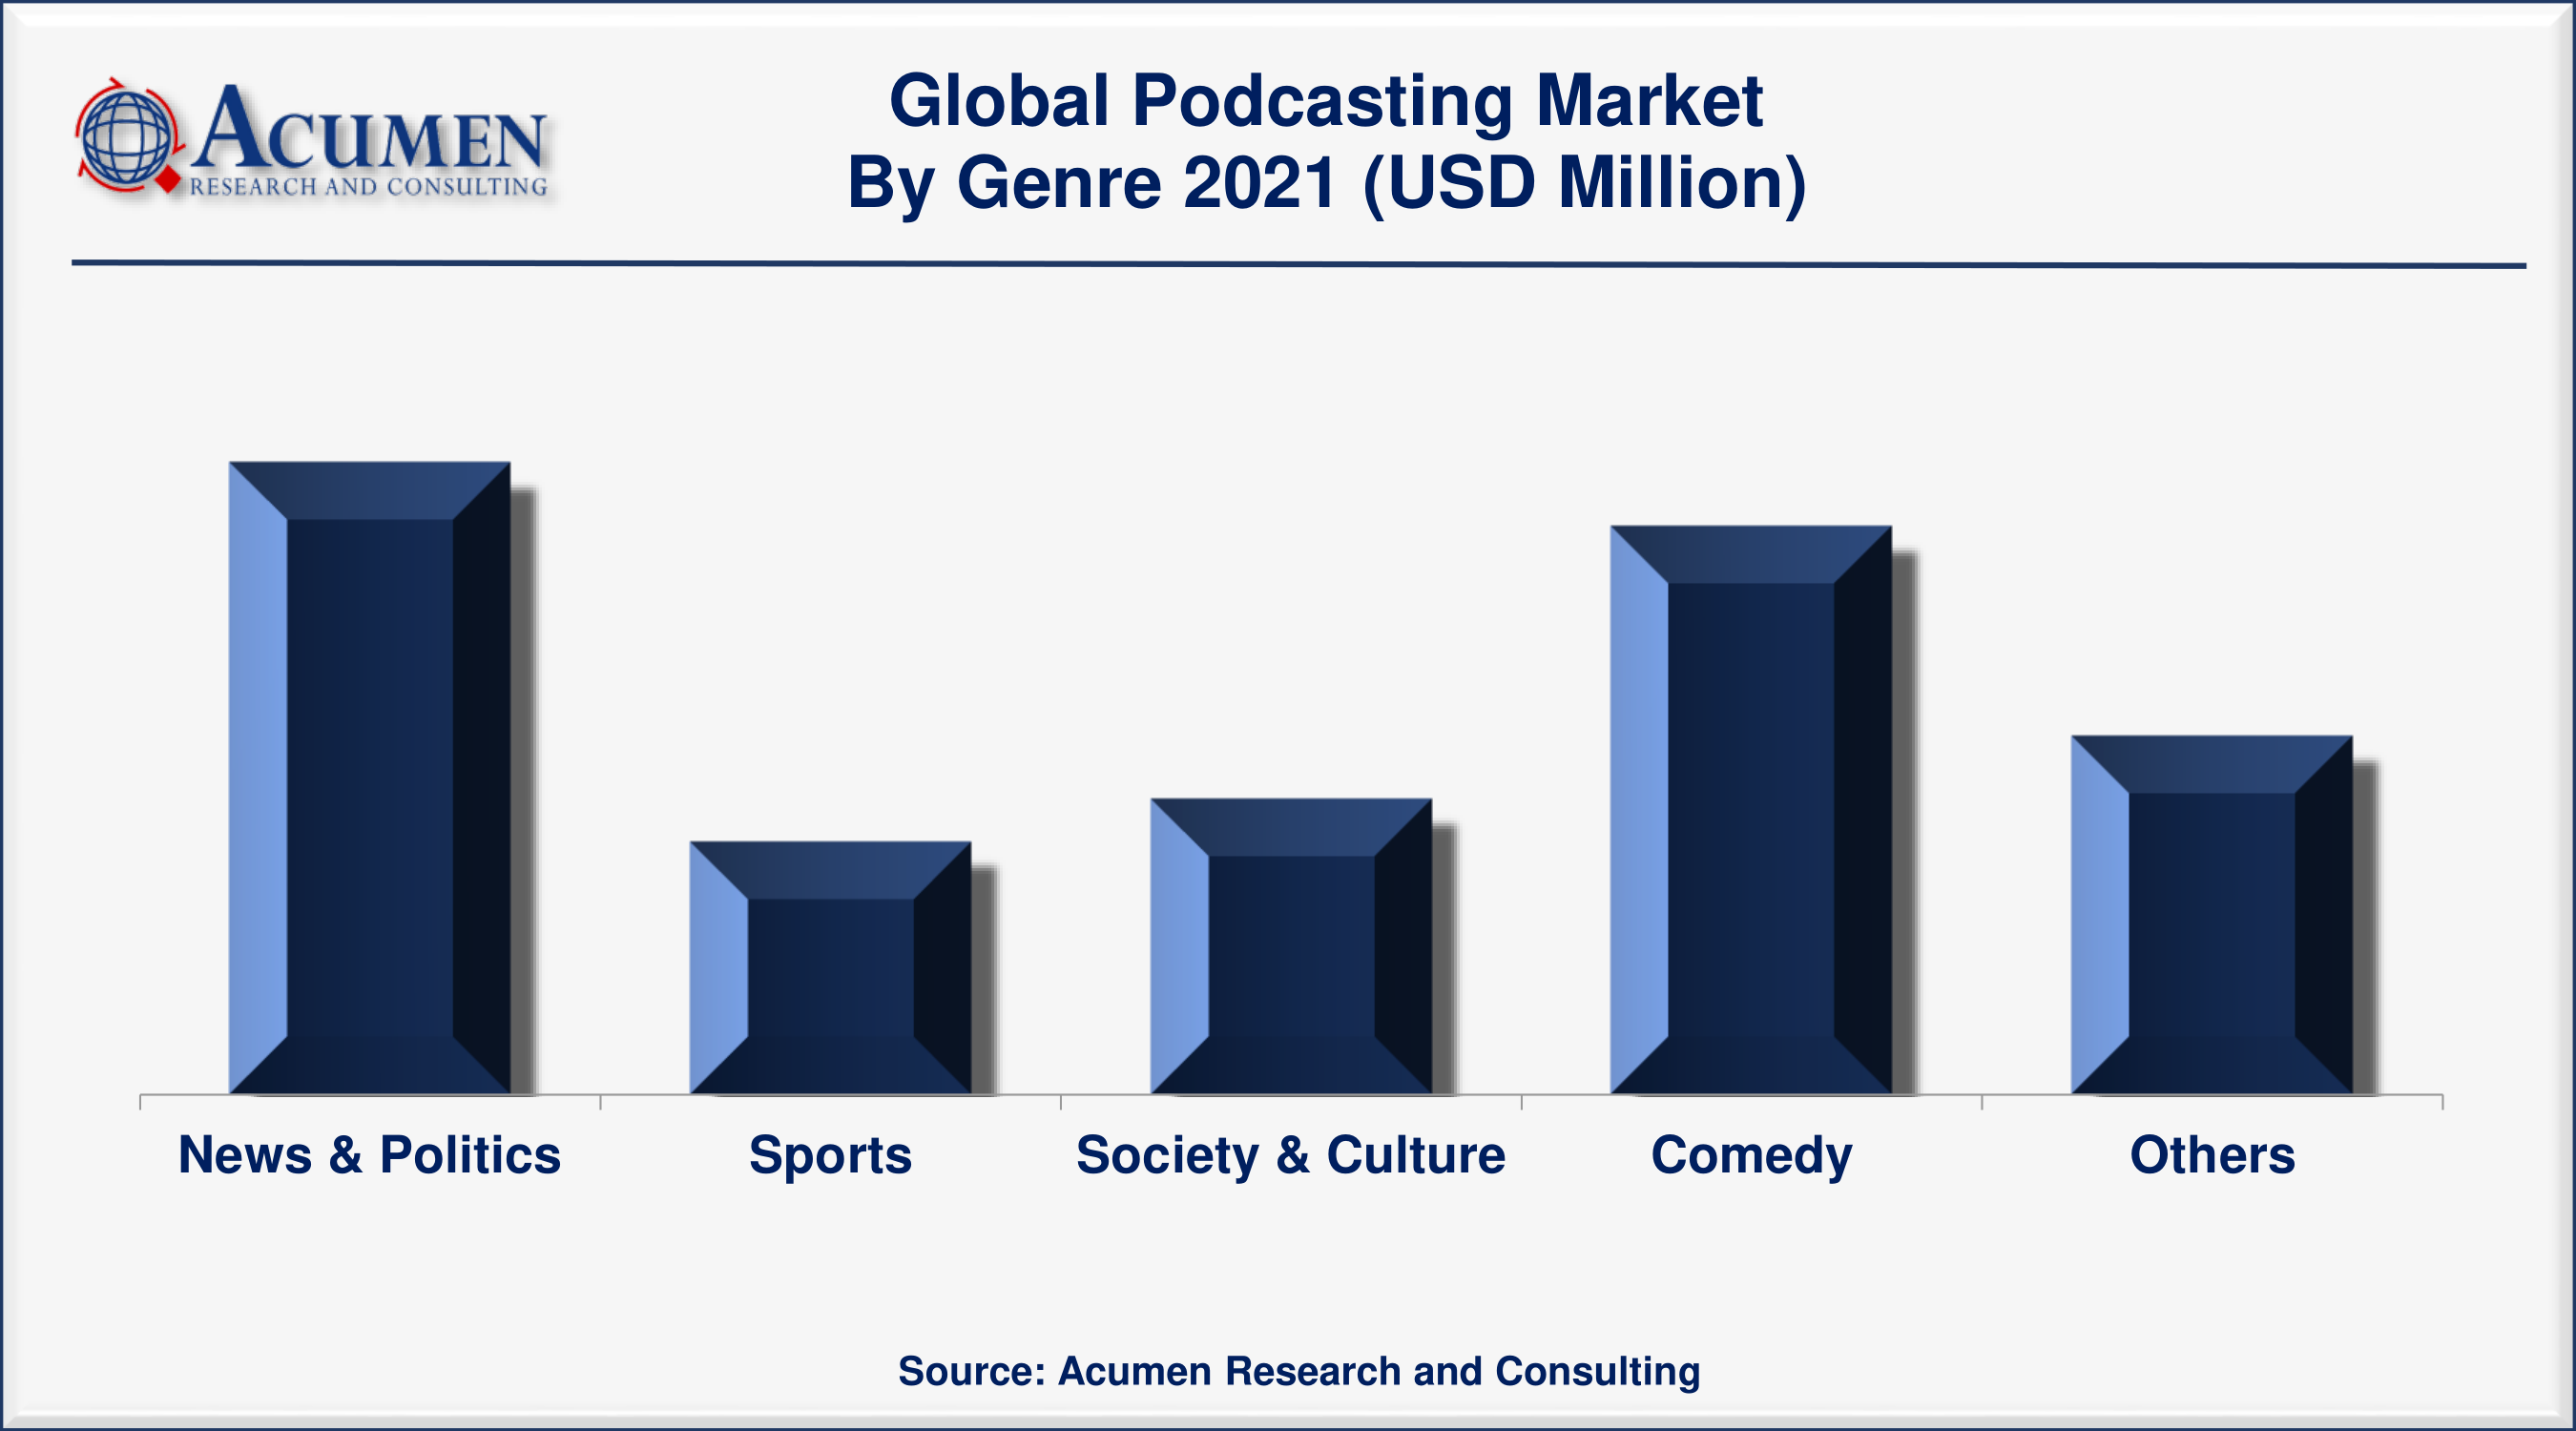 Podcasting Market Share was valued at USD 13,785 Million in 2021 and is predicted to be worth USD 153,071 Million by 2030, with a CAGR of 31.2% from 2022 to 2030.